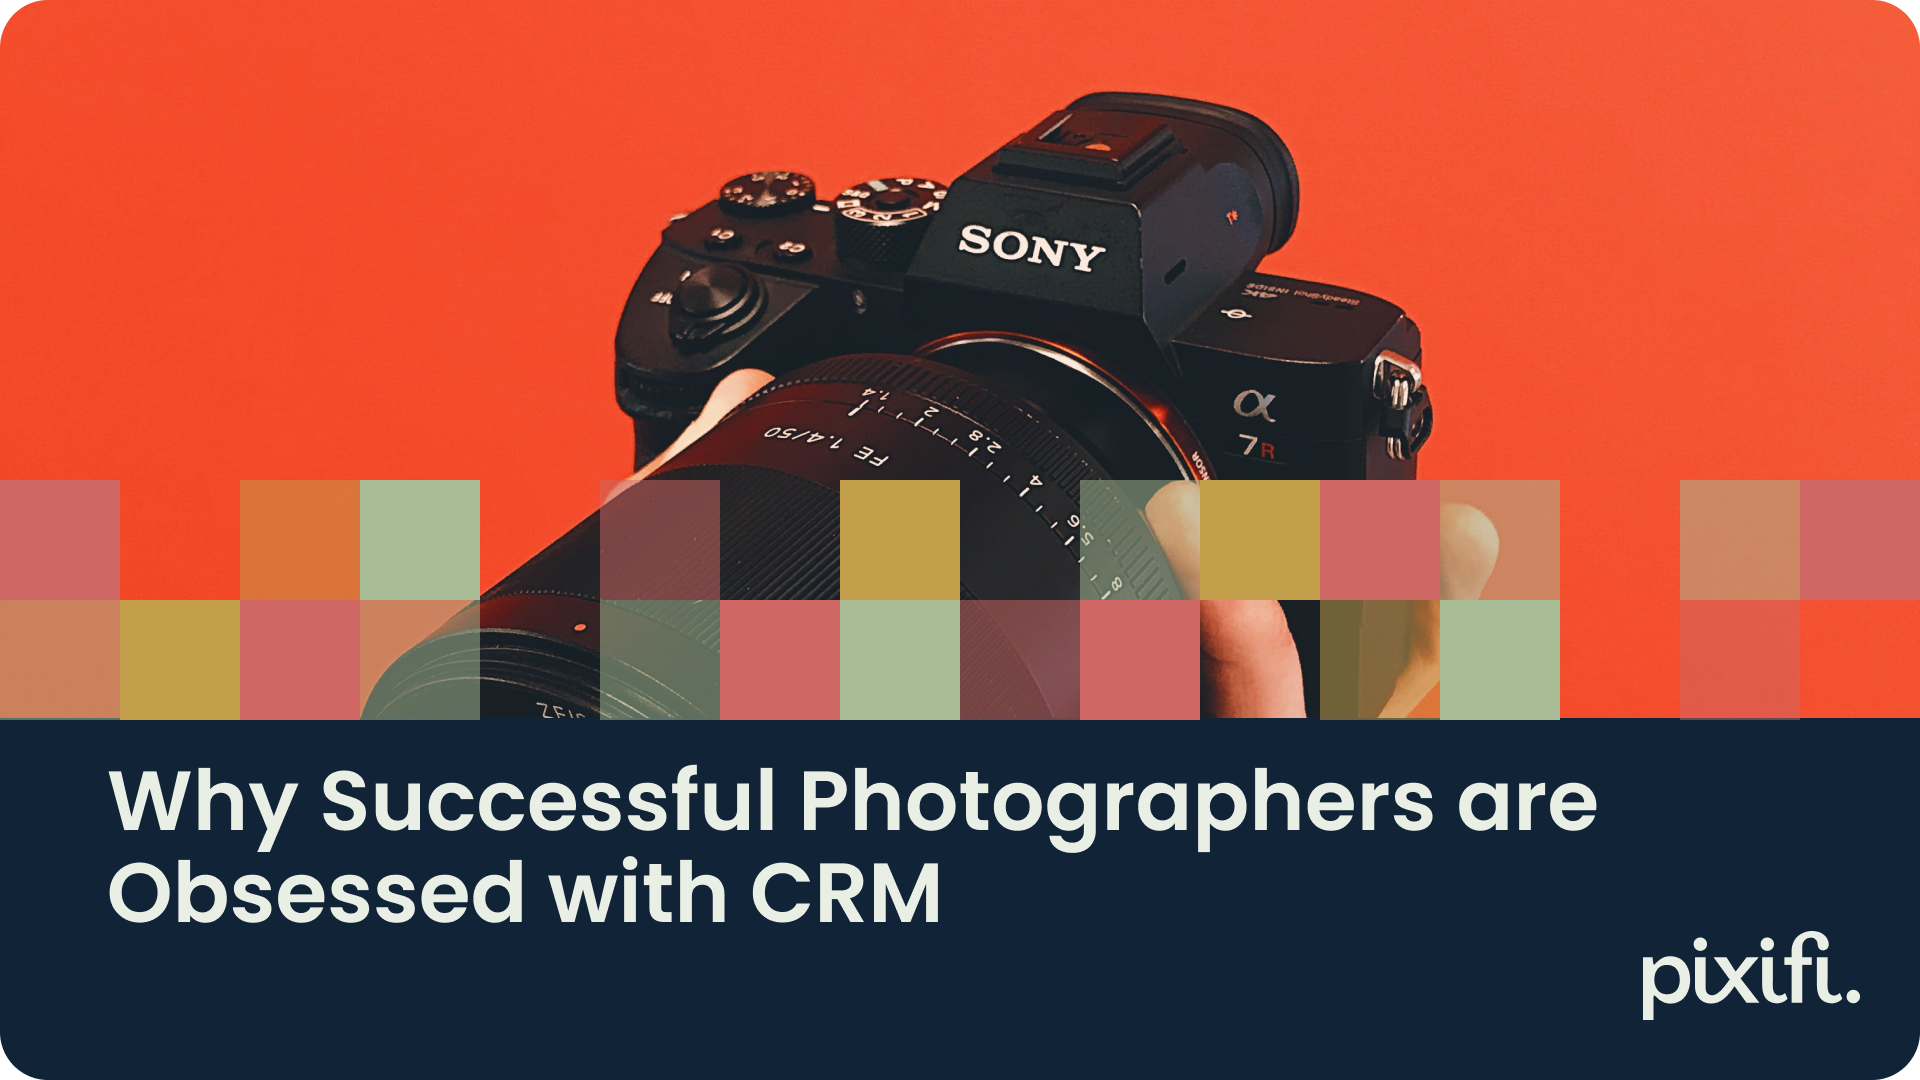 Why Successful Photographers are Obsessed with CRM